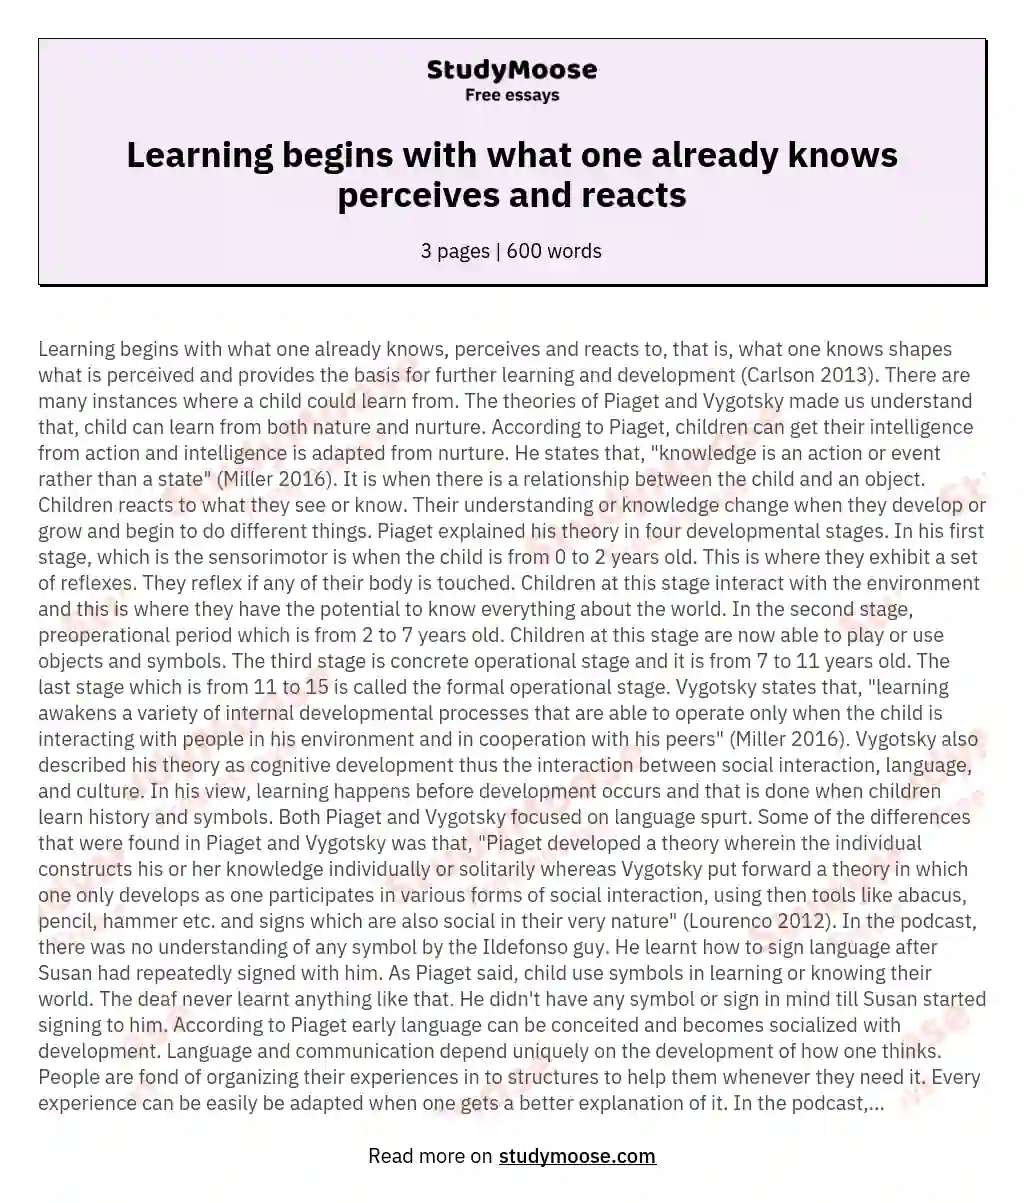 Learning begins with what one already knows perceives and reacts